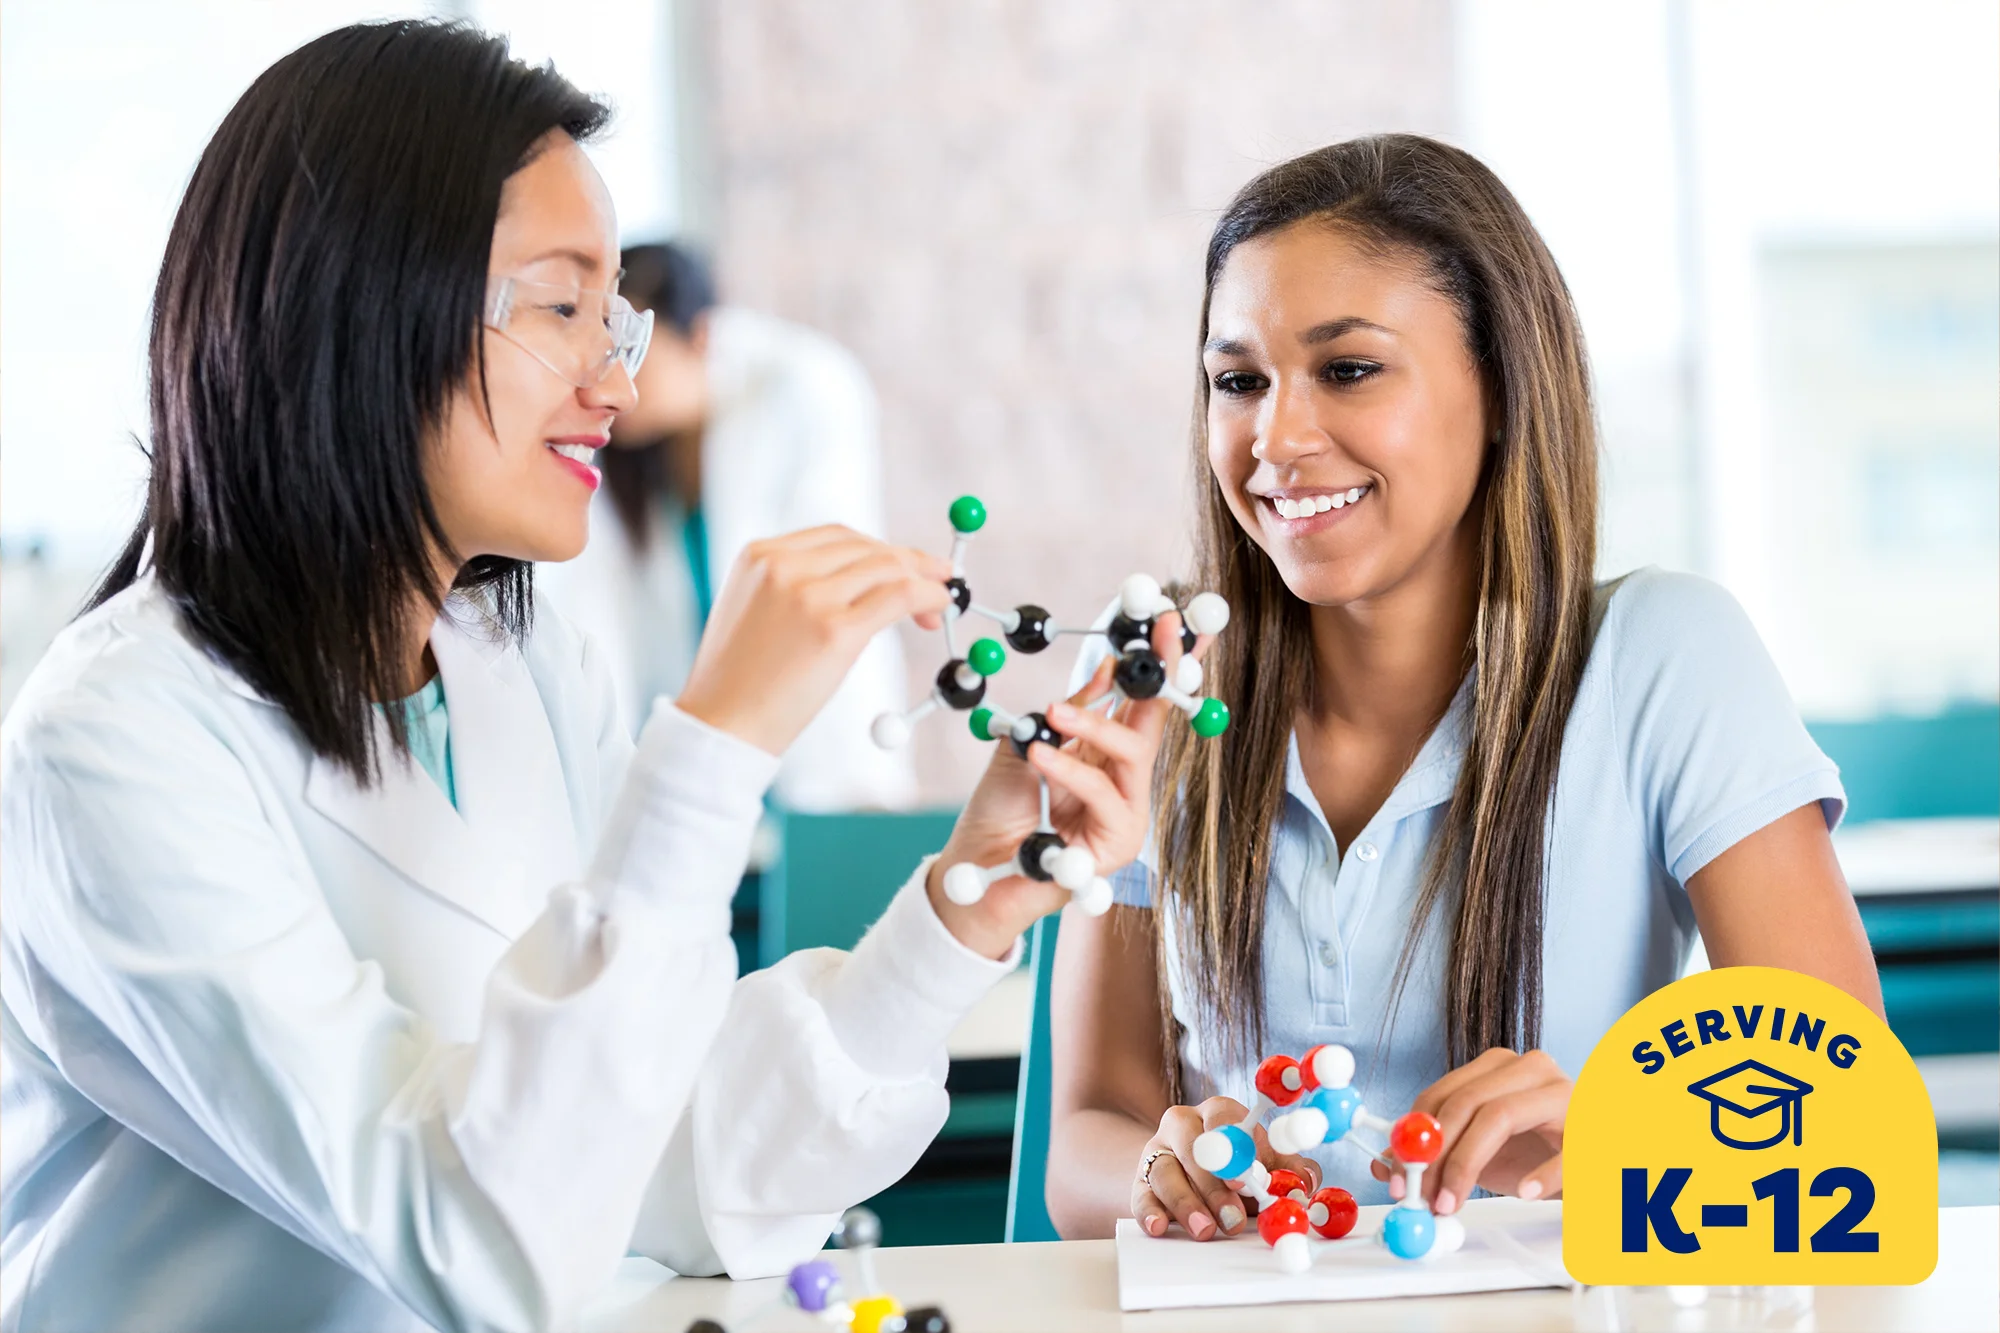 teacher wearing a lab coat and holding a molecular model and explaining it to her student